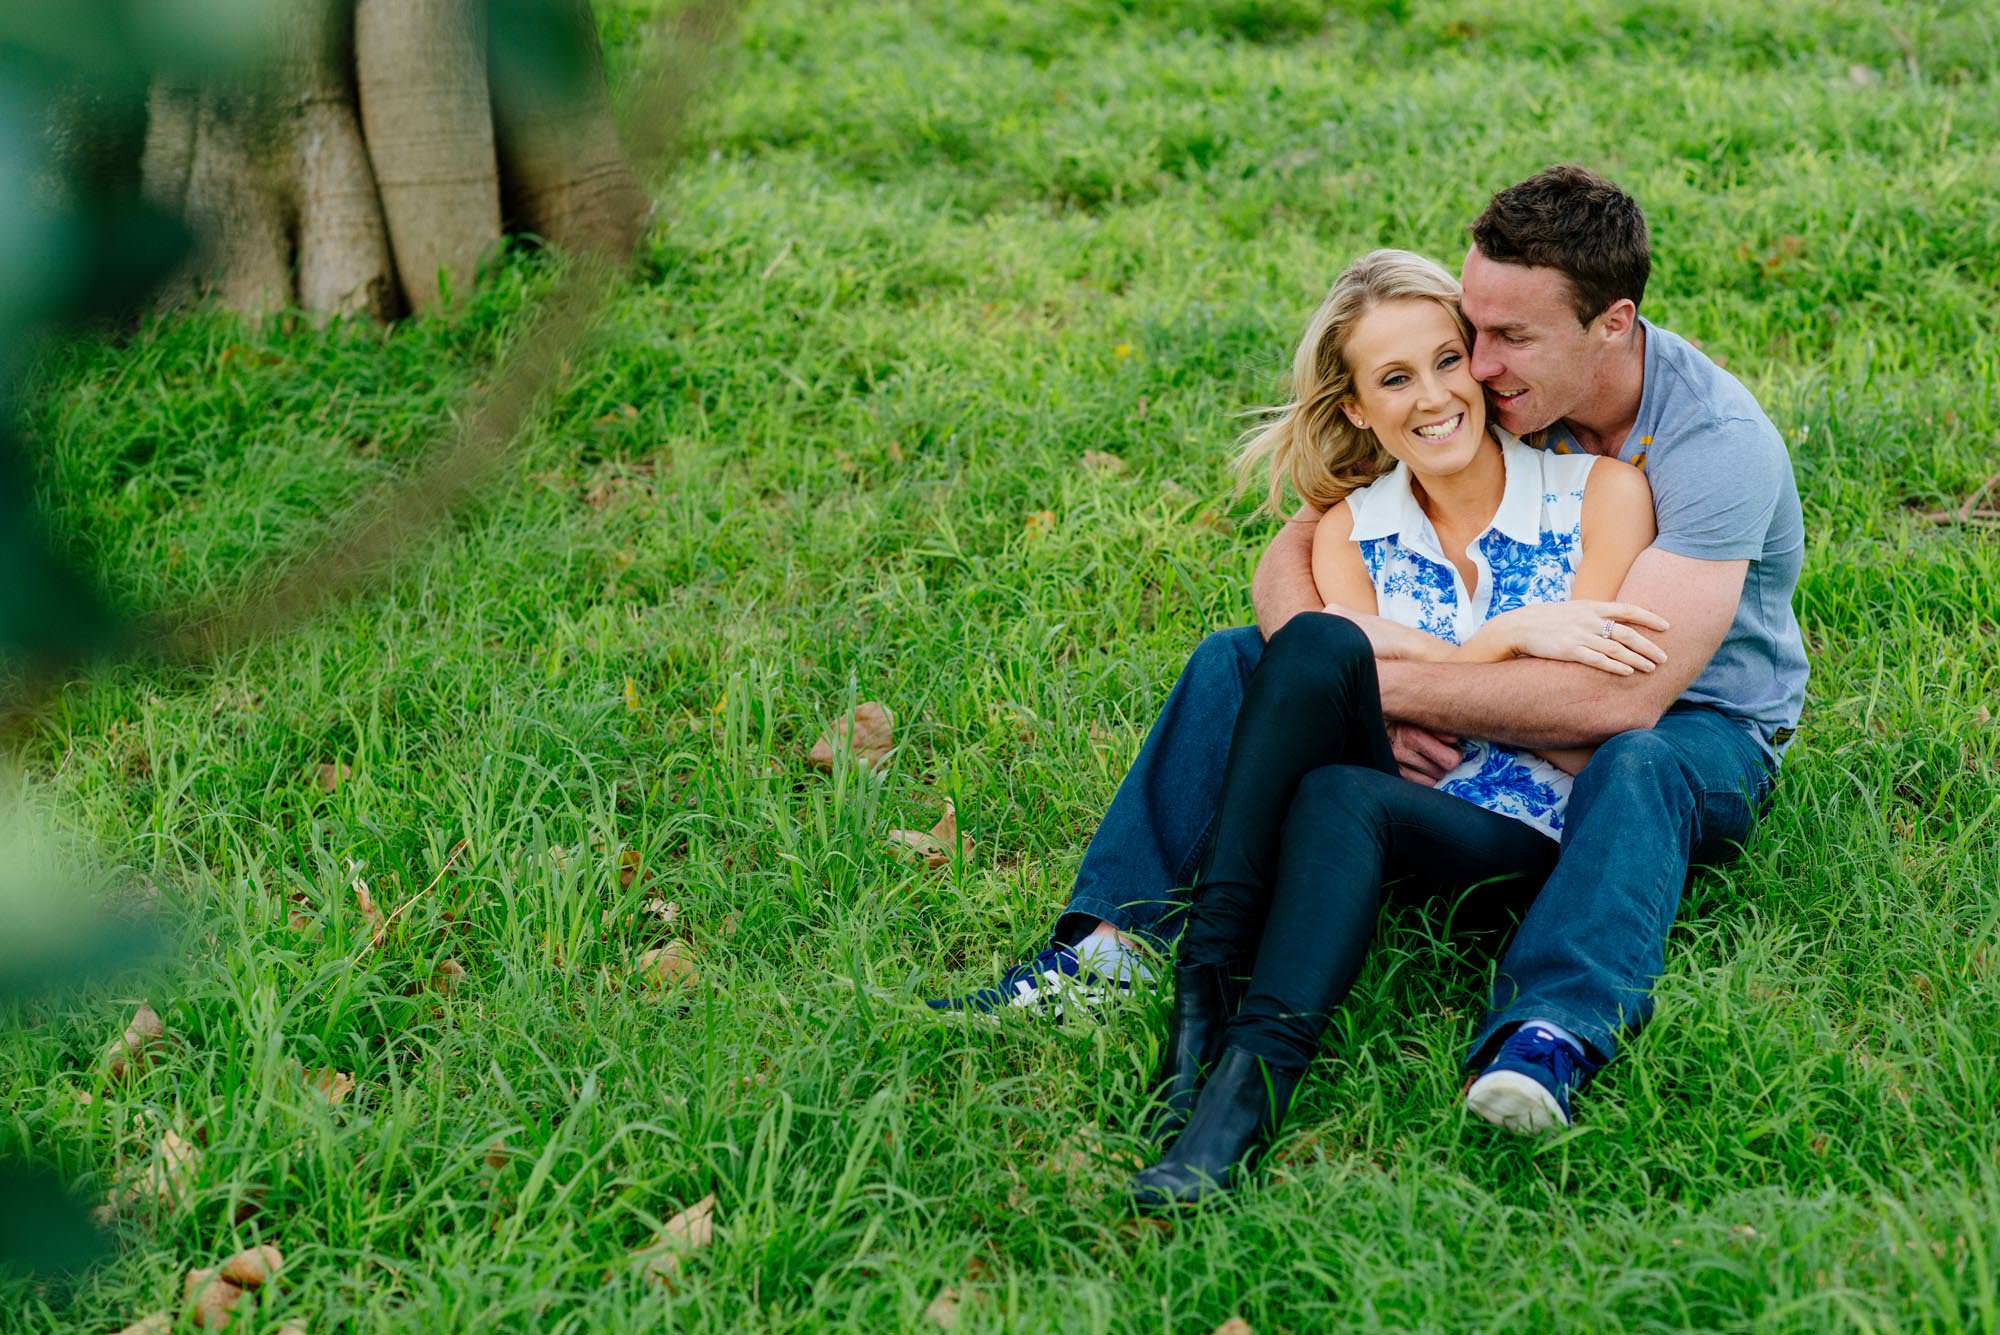 Centennial Park Engagement photos with James Maloney and Jessica Anderson